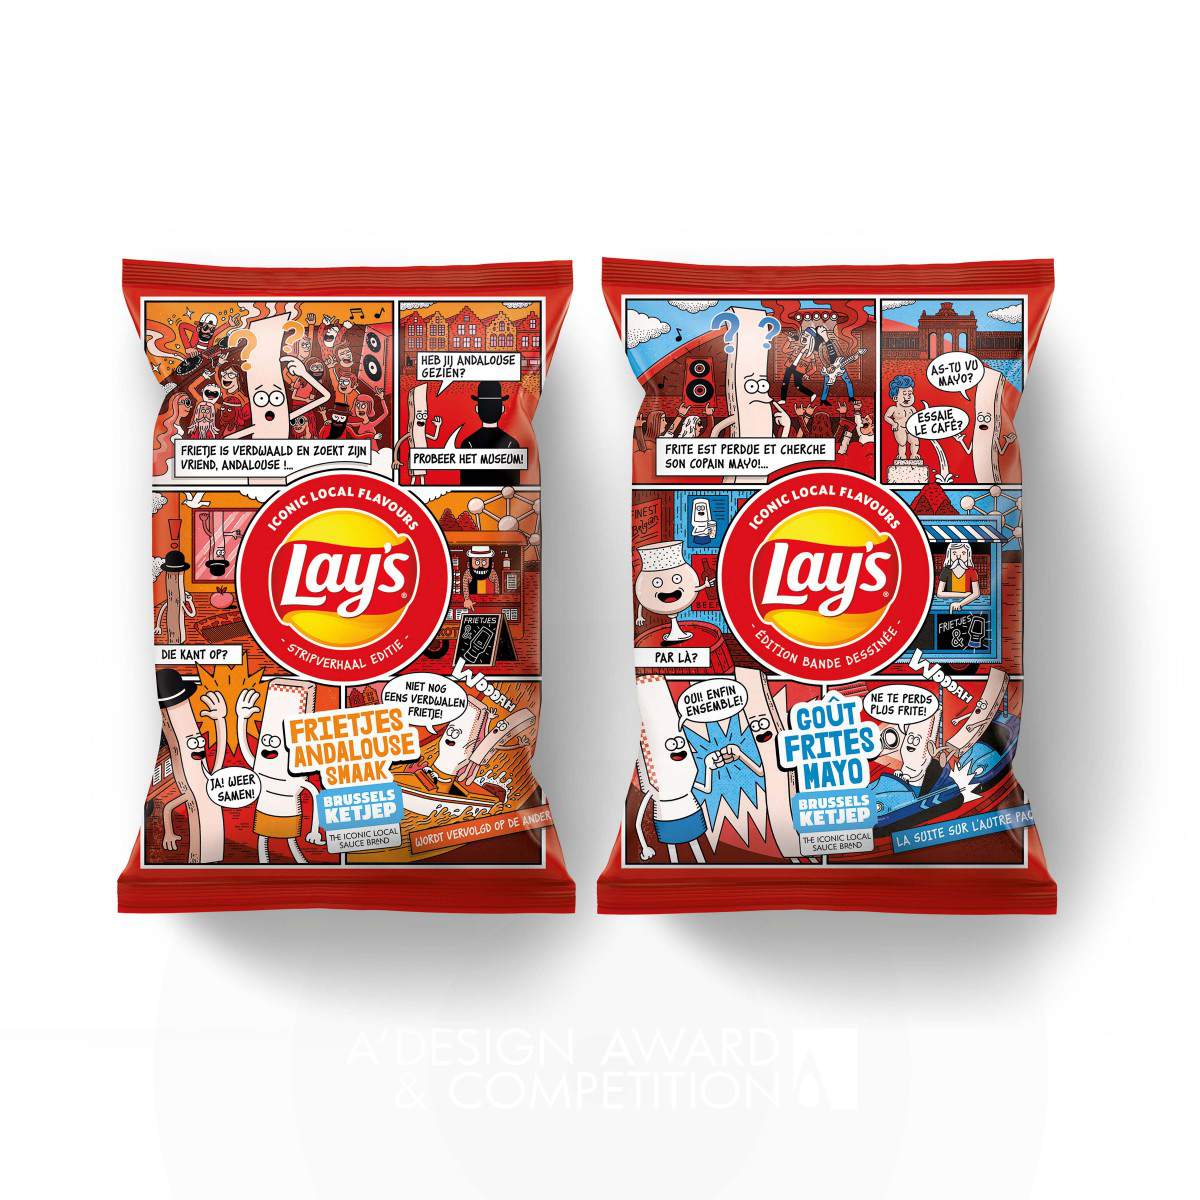 Lay's More Belgian Really Impossible Food Package Design by PepsiCo Design & Innovation